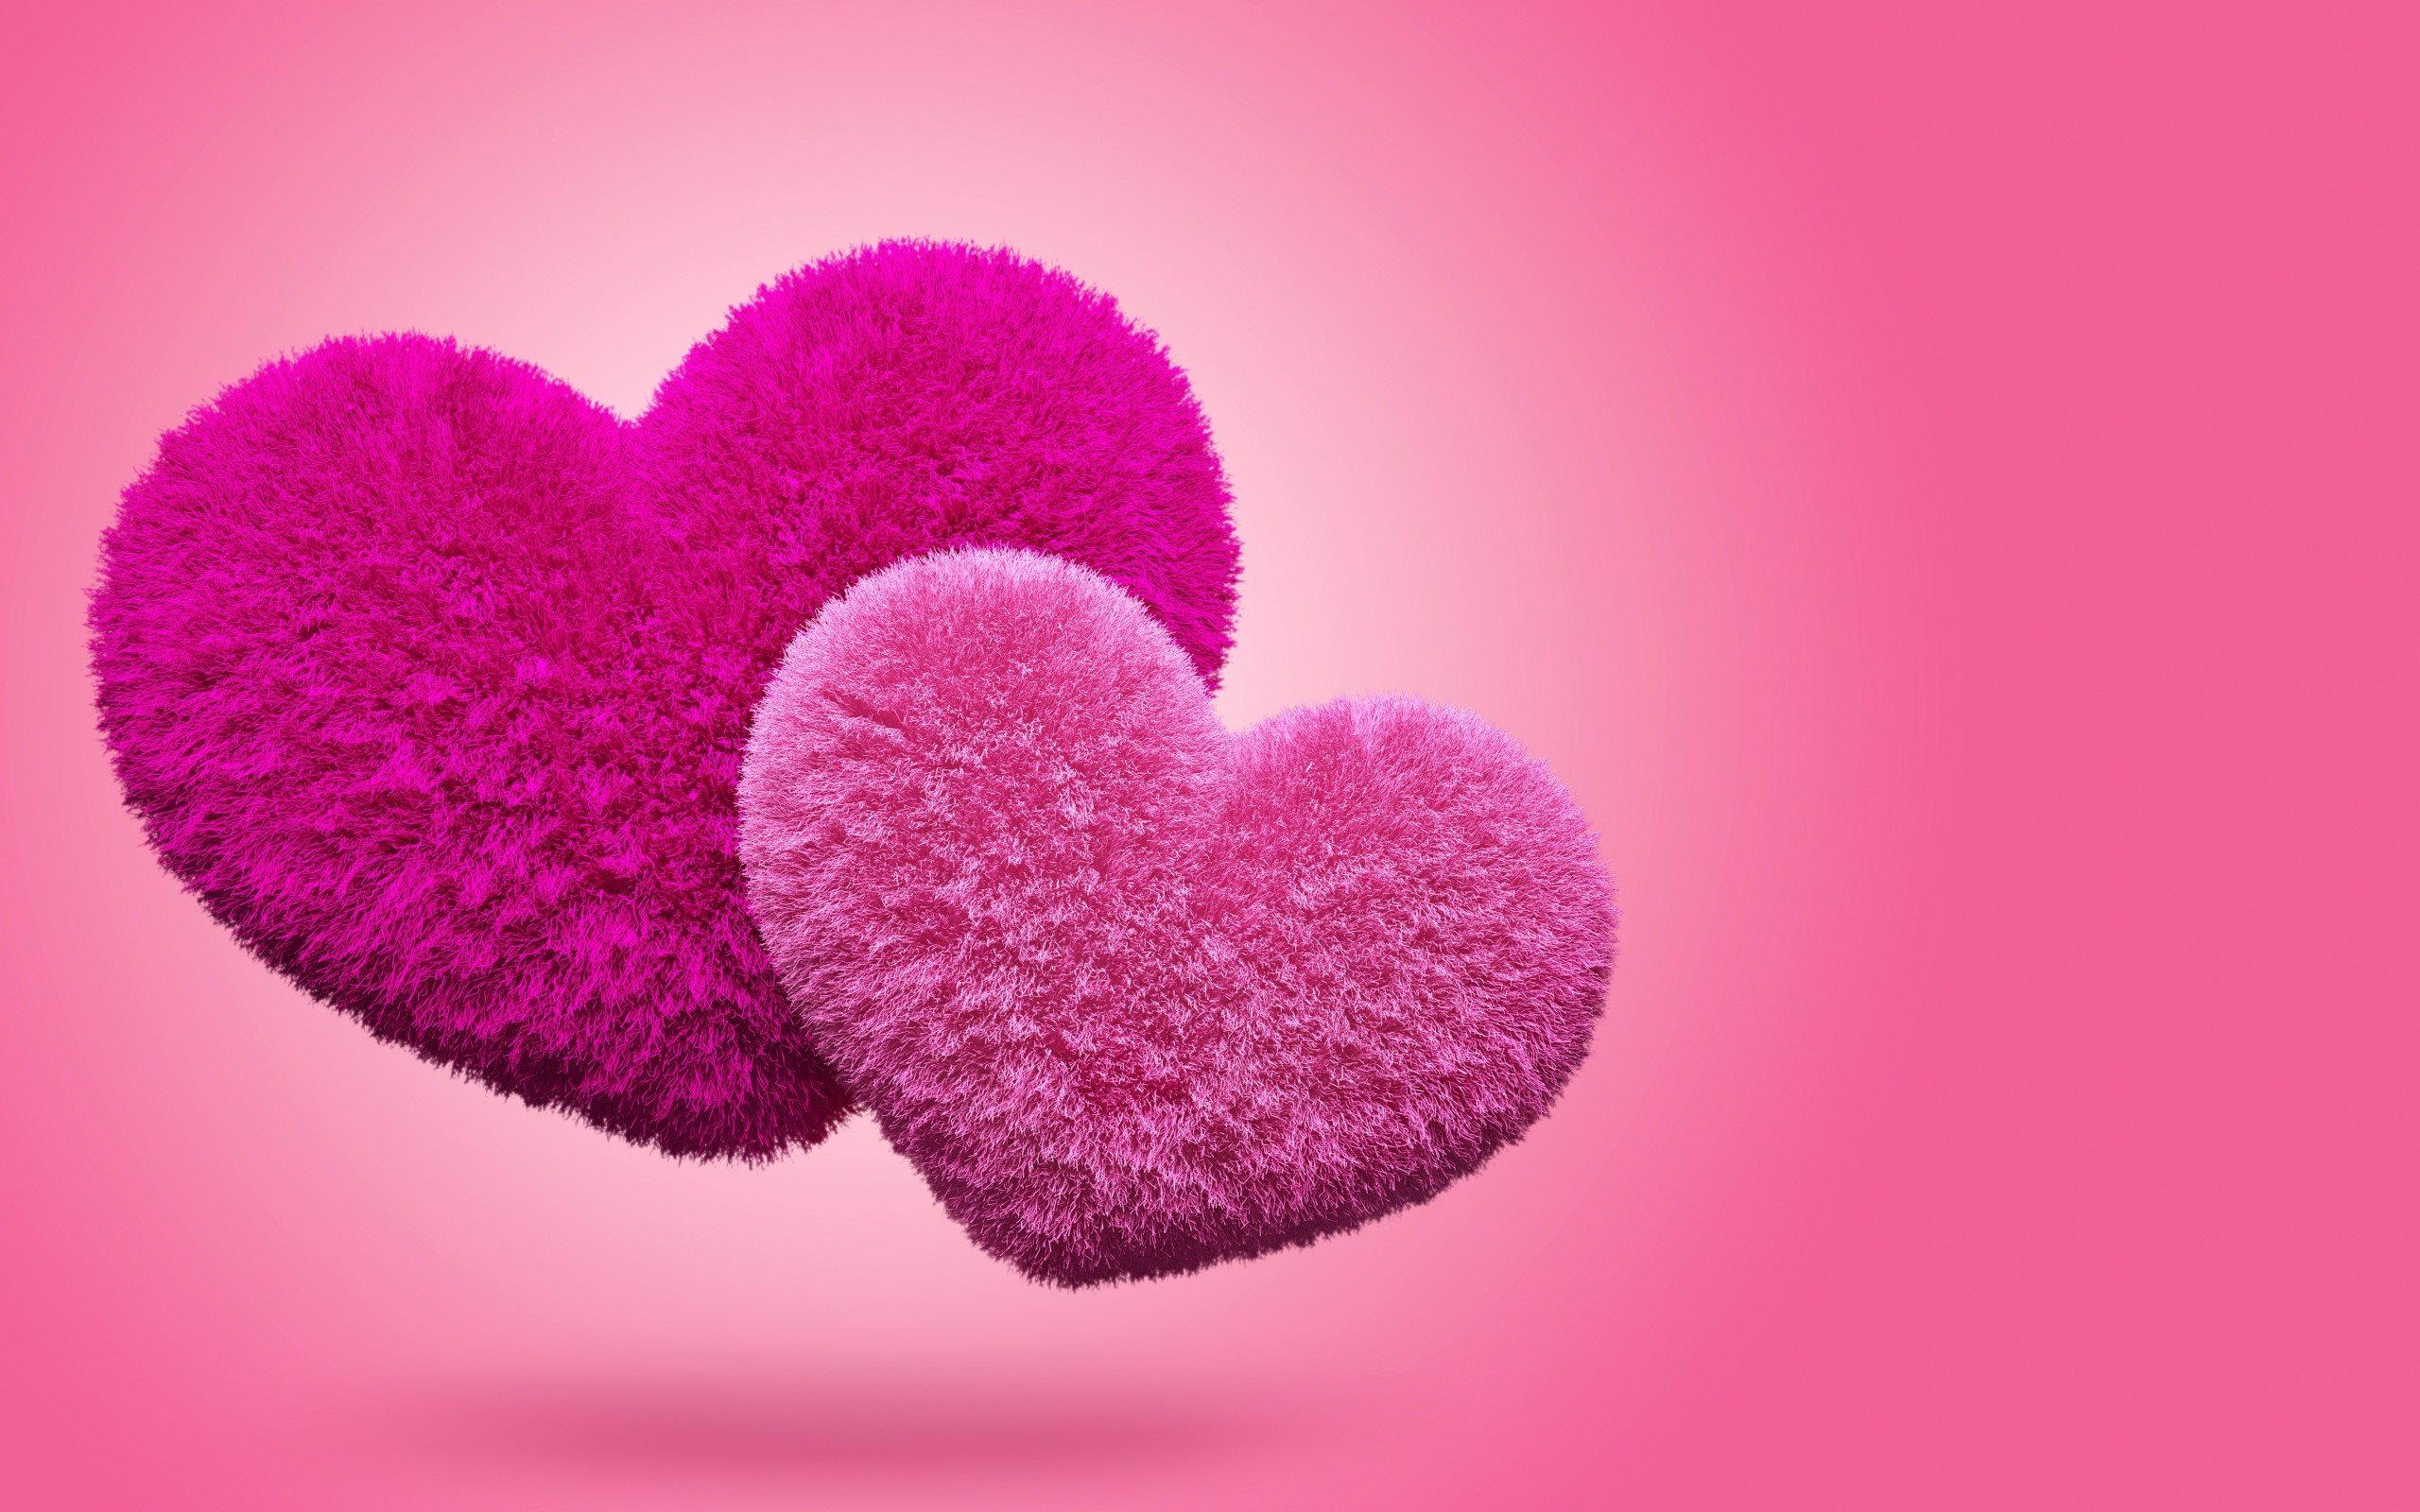 Two Heart Images Pink Colour - HD Wallpaper 